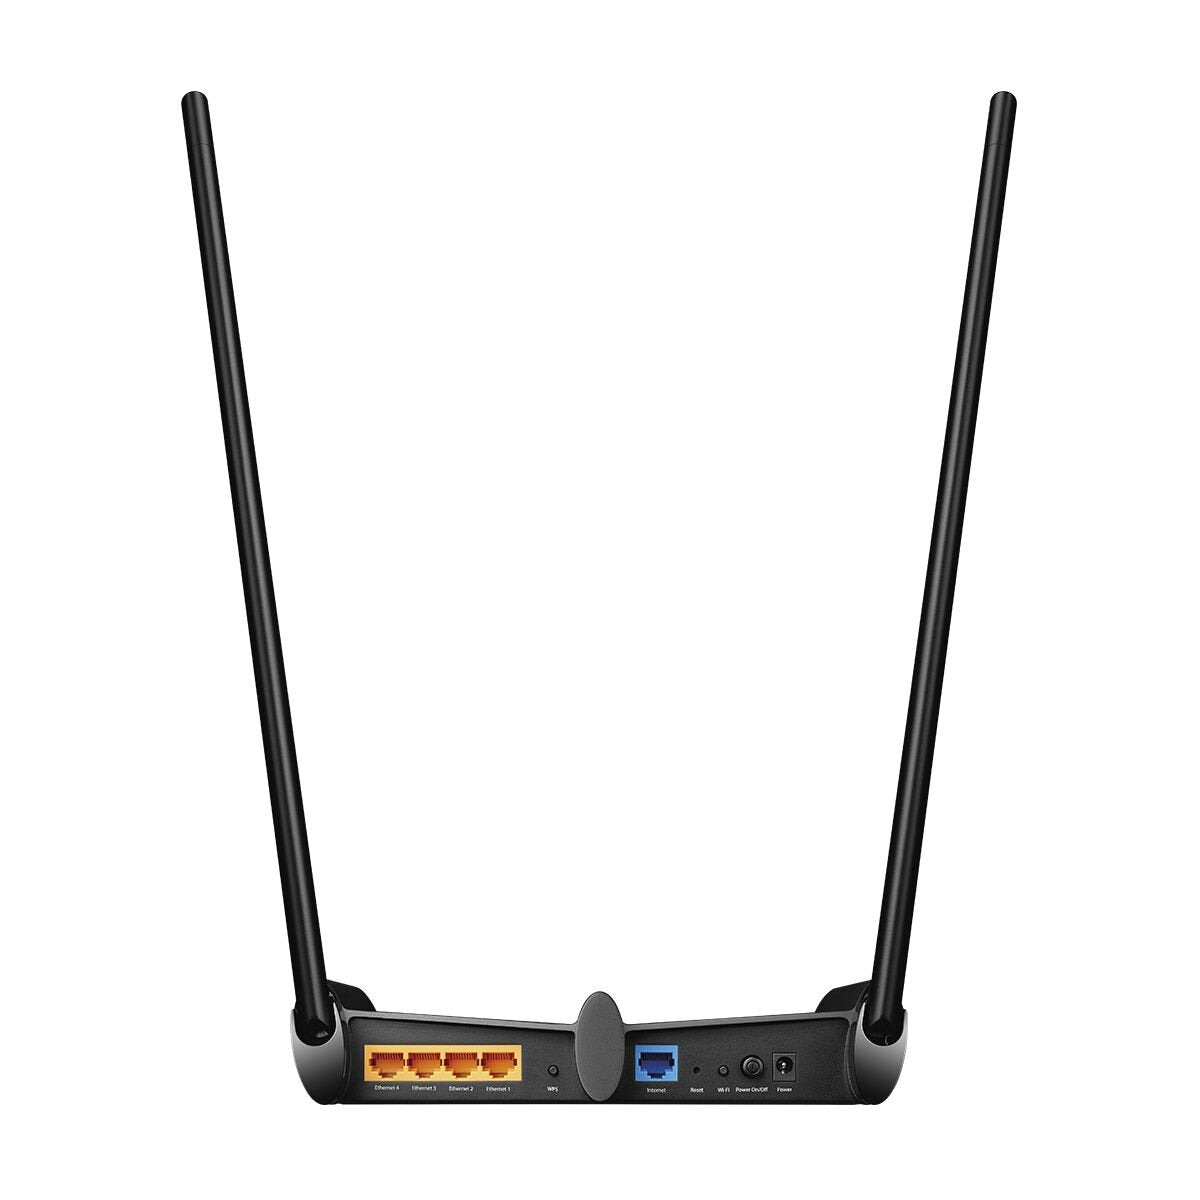 Router TP-LINK, 2, Negro, 2.4Ghz, 300Mbps